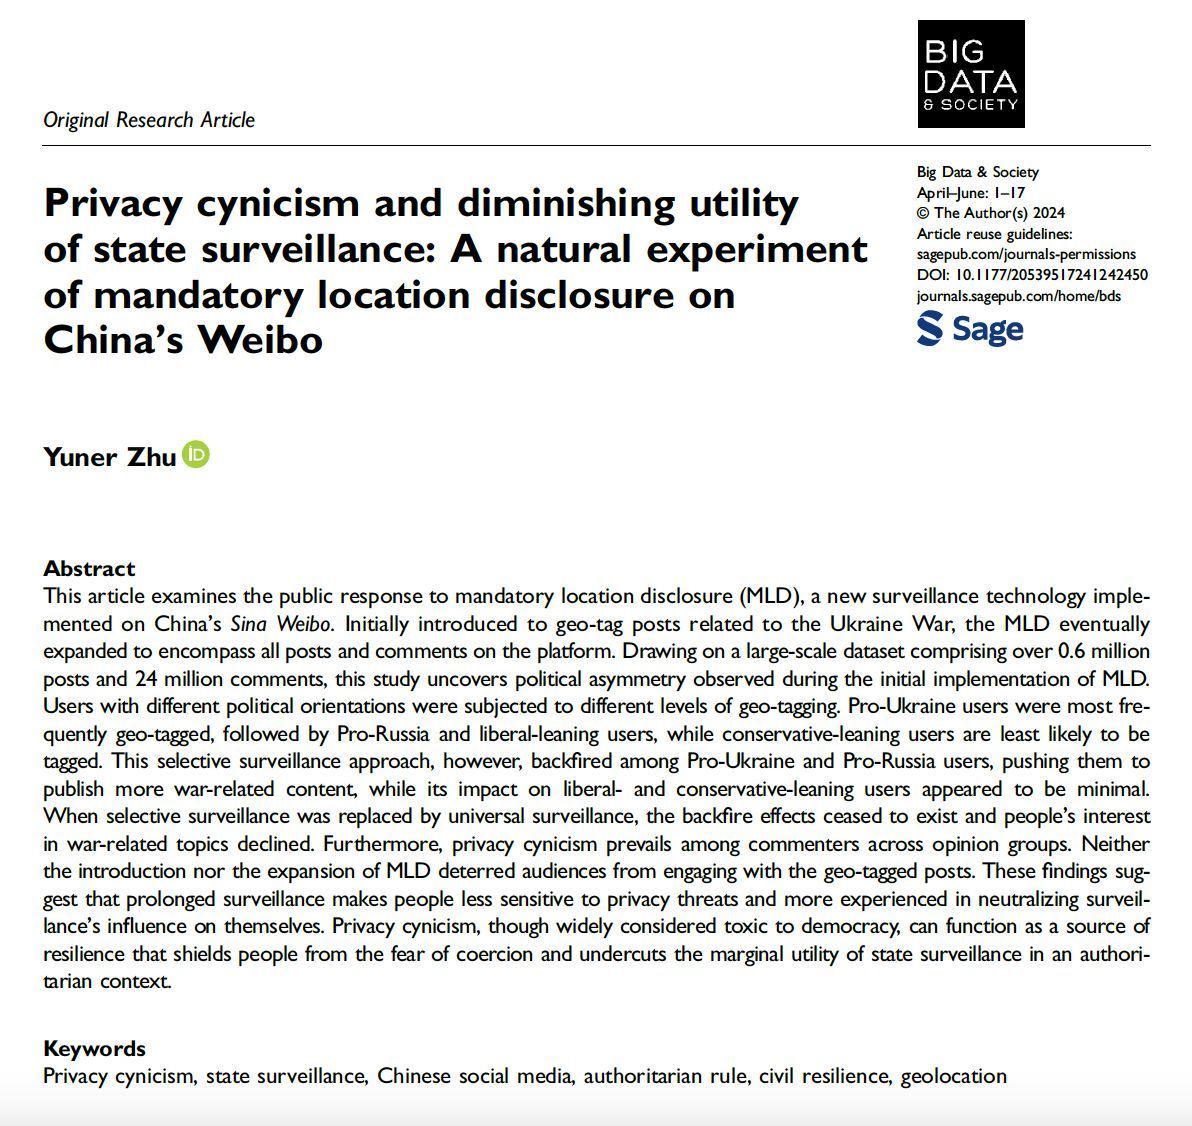 New paper🎙“Privacy cynicism and diminishing utility of state surveillance: A natural experiment of mandatory location disclosure on China’s Weibo” by Yuner Zhu from the special theme on Digital Resignation and Privacy Cynicism #surveillance #geolocation 🔗buff.ly/4cVe5bE